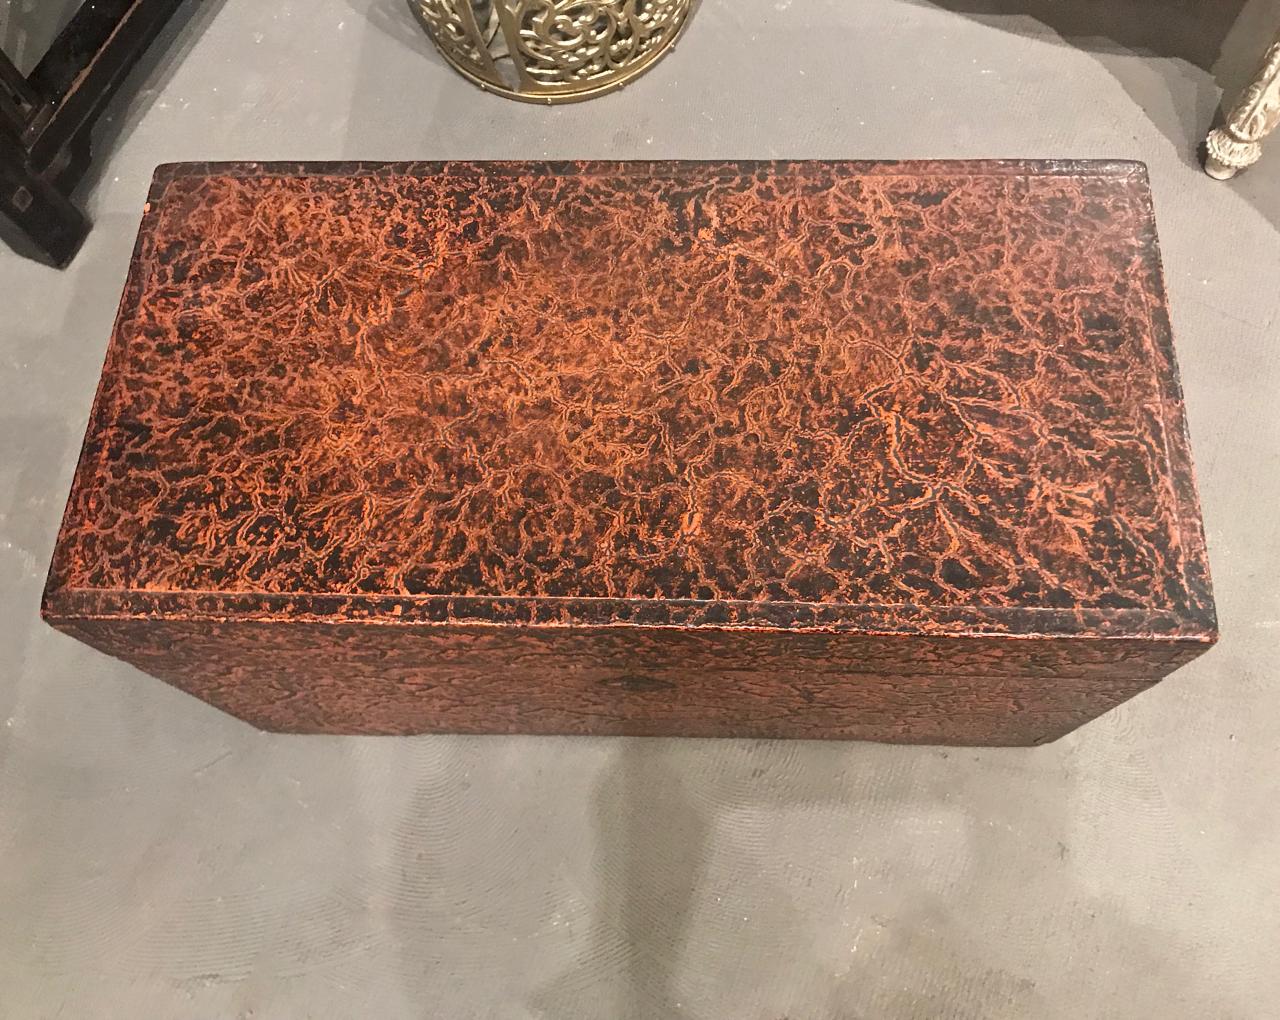 This is a charming and unusual Chinese faux alligator lacquered storage trunk. The trunk is in great original condition with all original elements present. The faux alligator lacquered surface adds interet and a bit of whimsy.